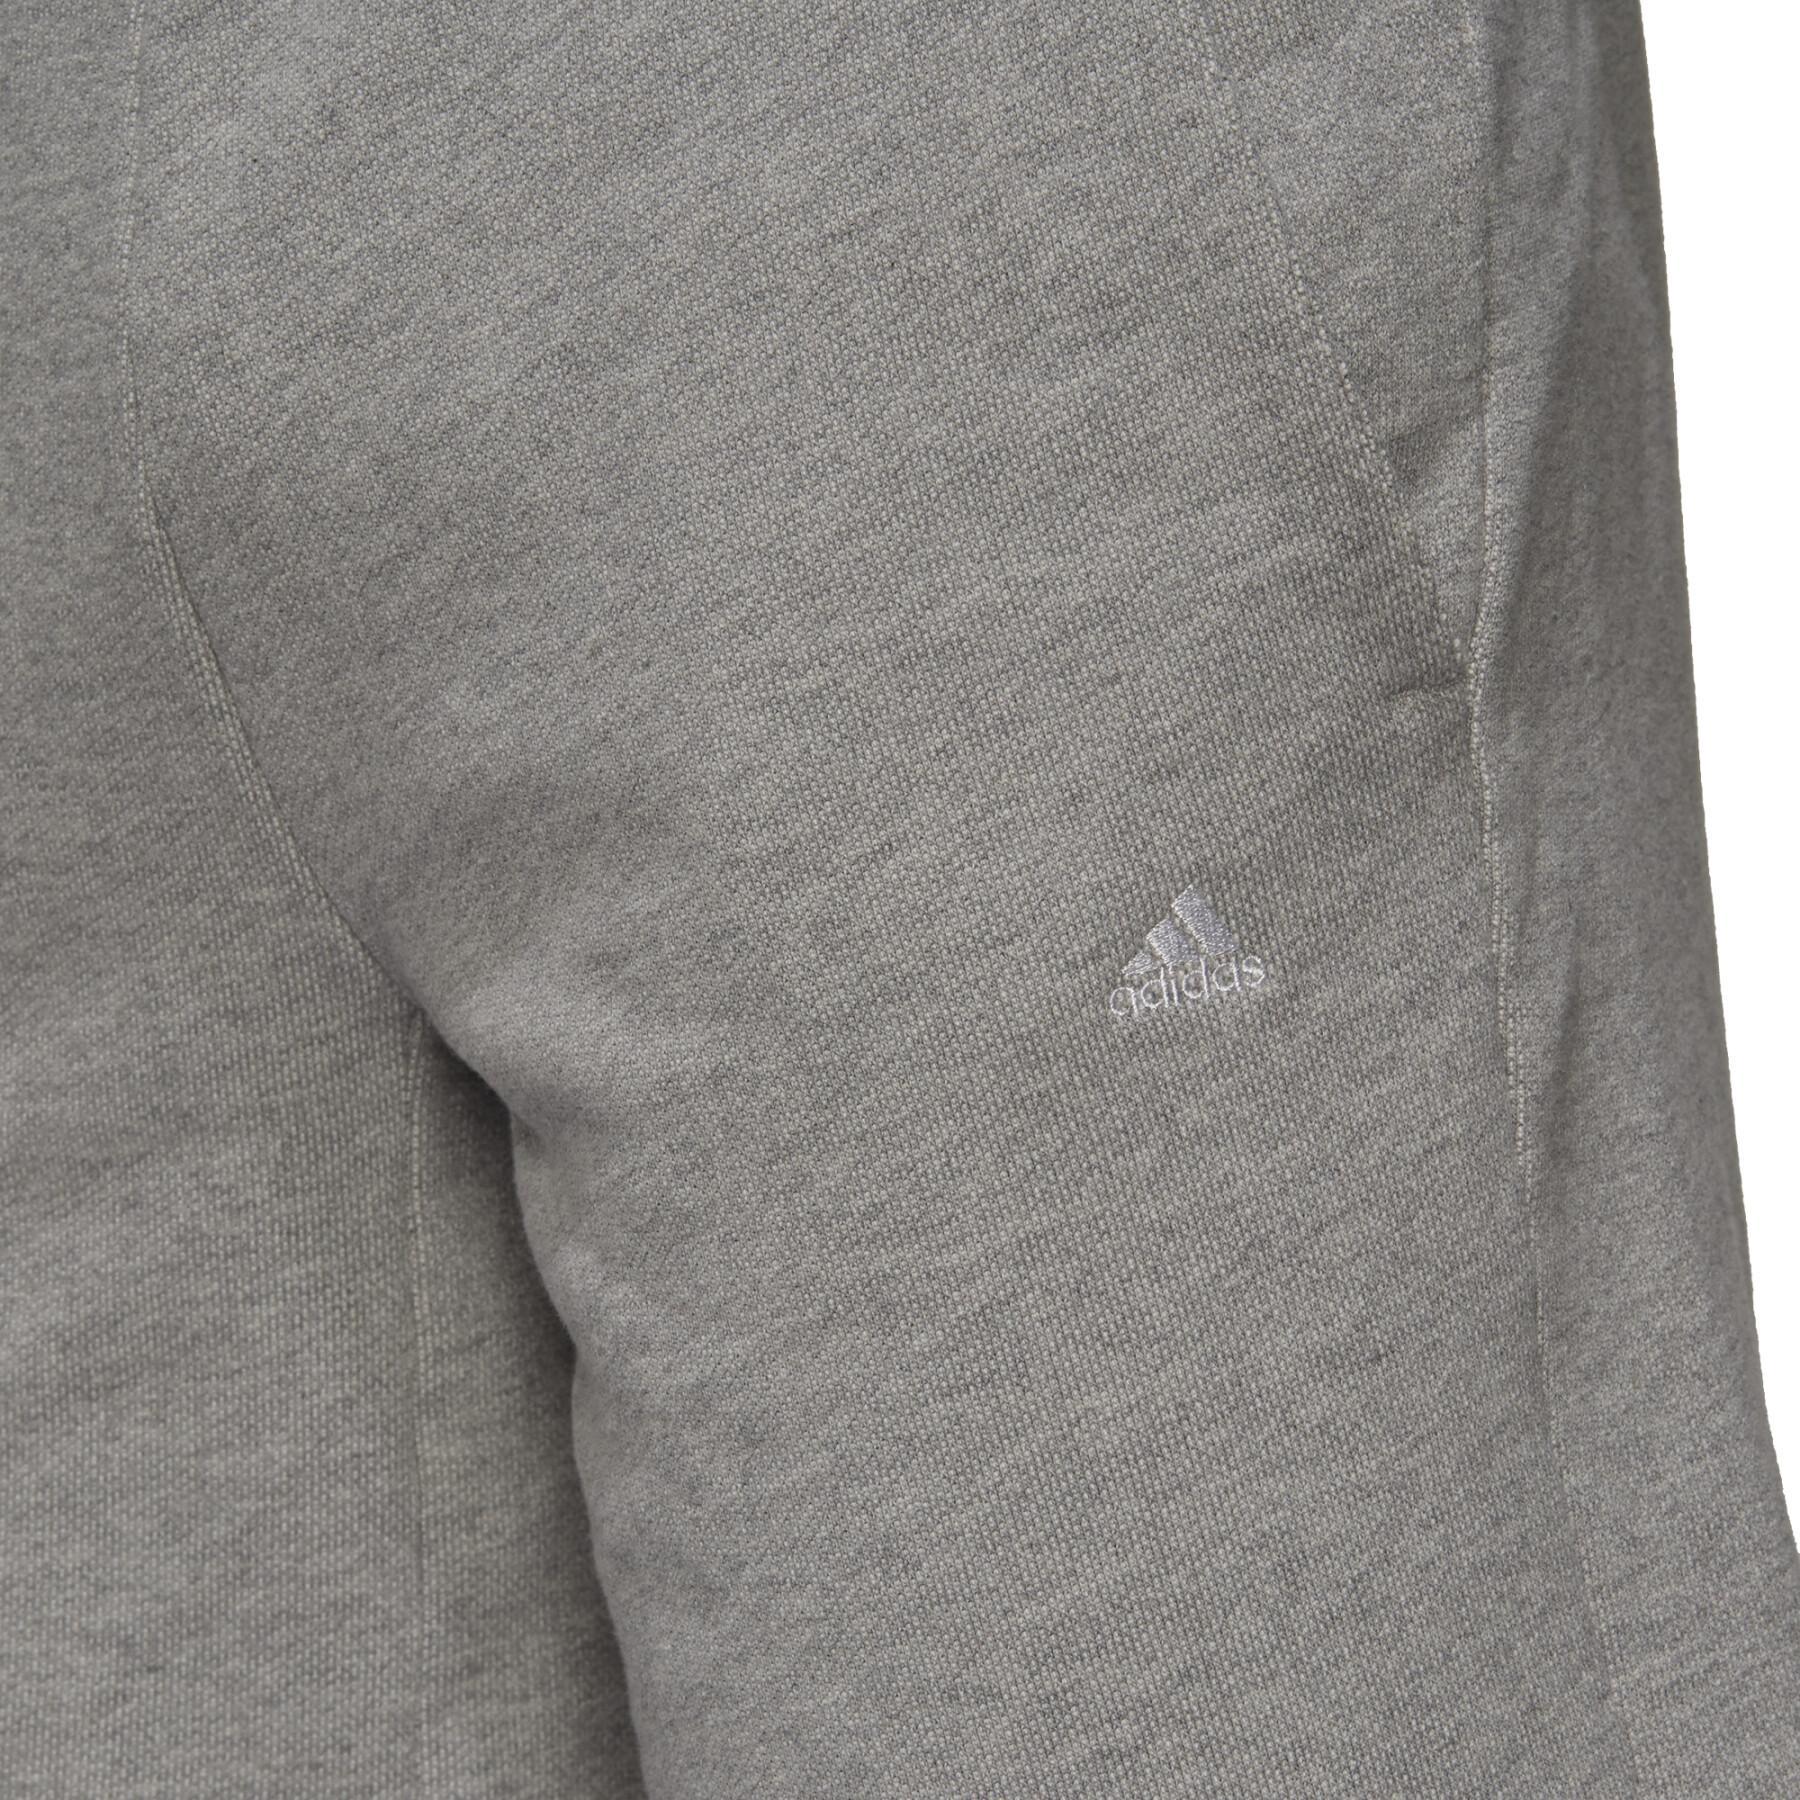 Short adidas Sportswear Comfy and Chill